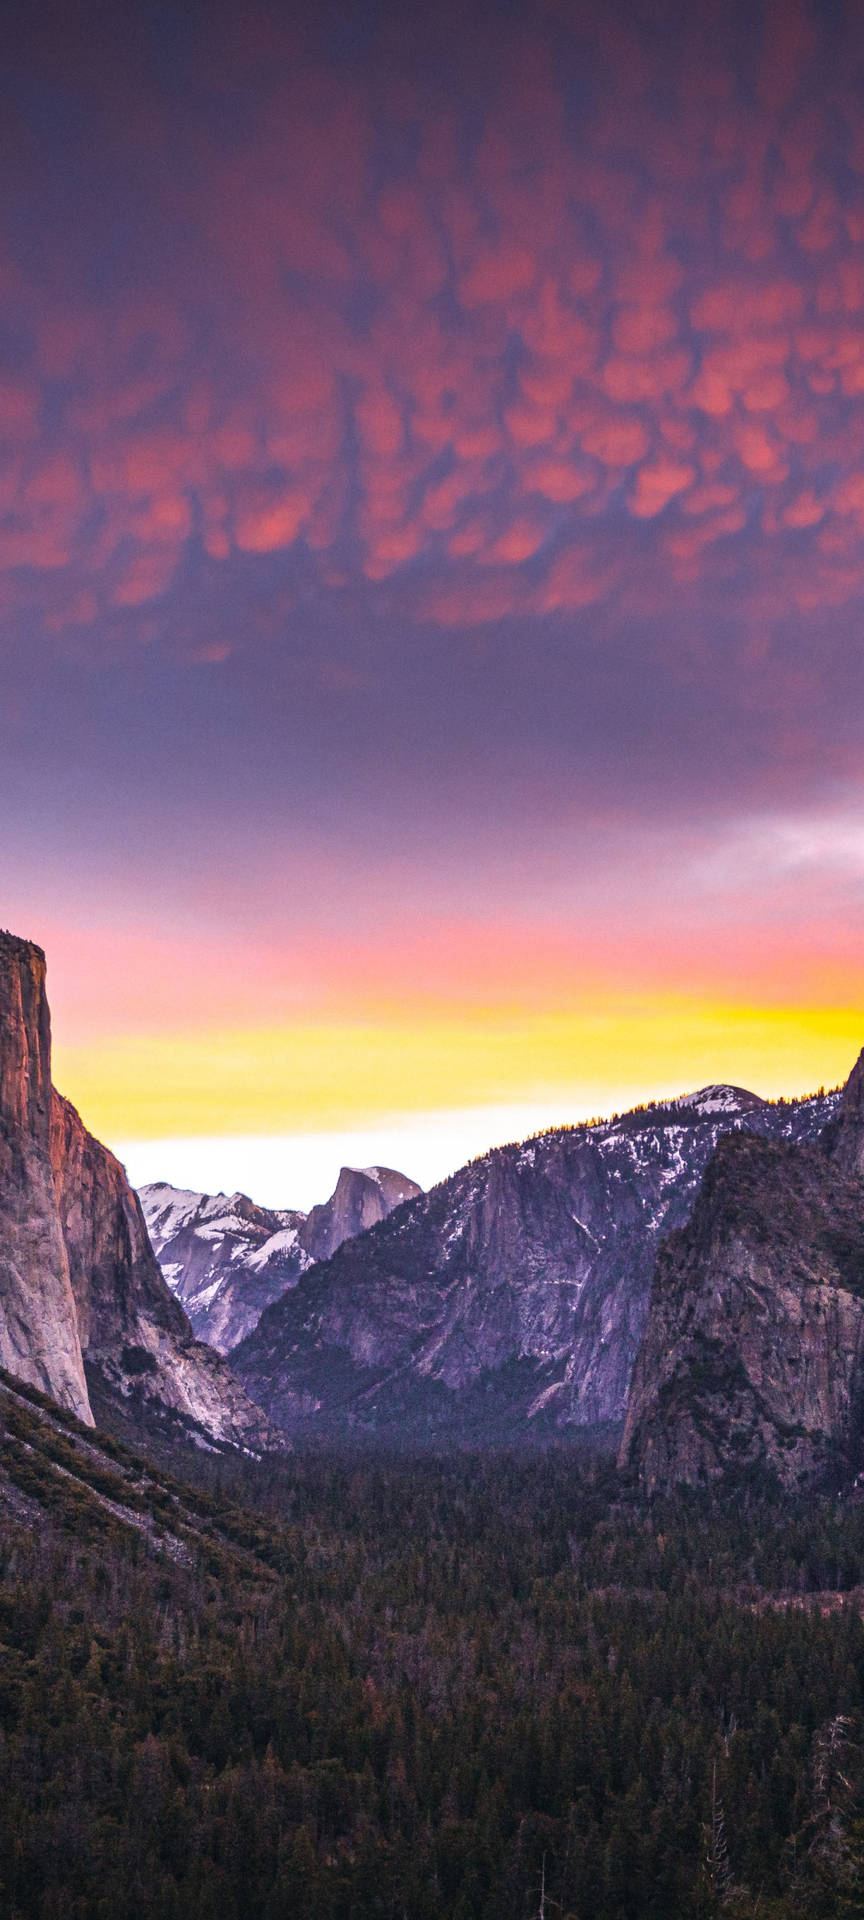 Enjoy the breathtaking views at Yosemite National Park on your Iphone Wallpaper